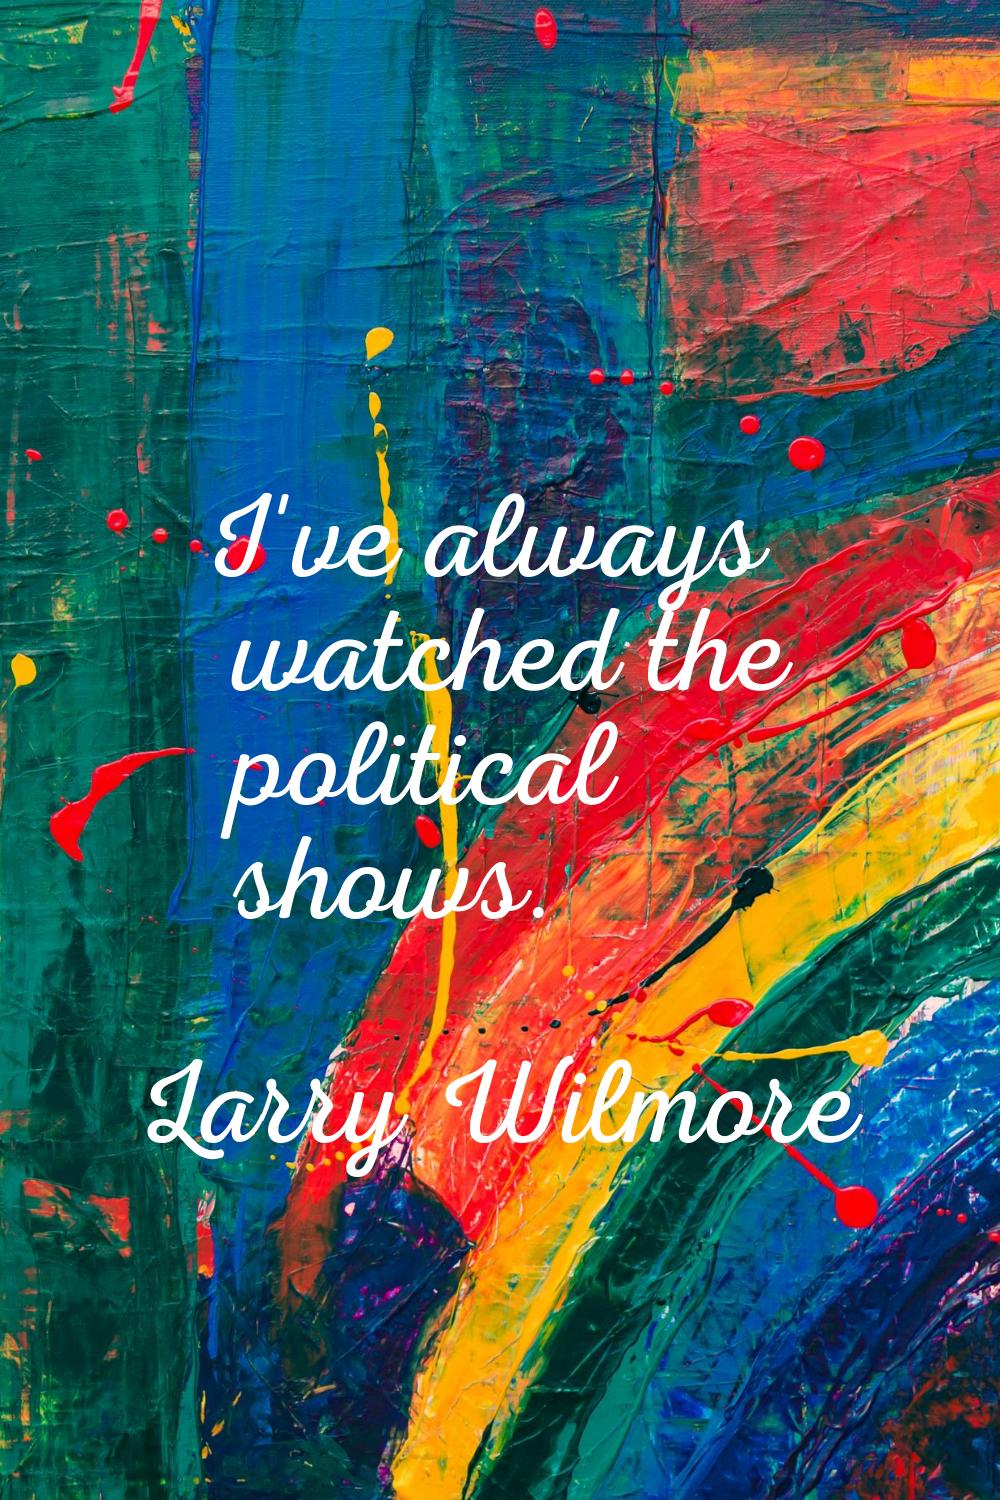 I've always watched the political shows.